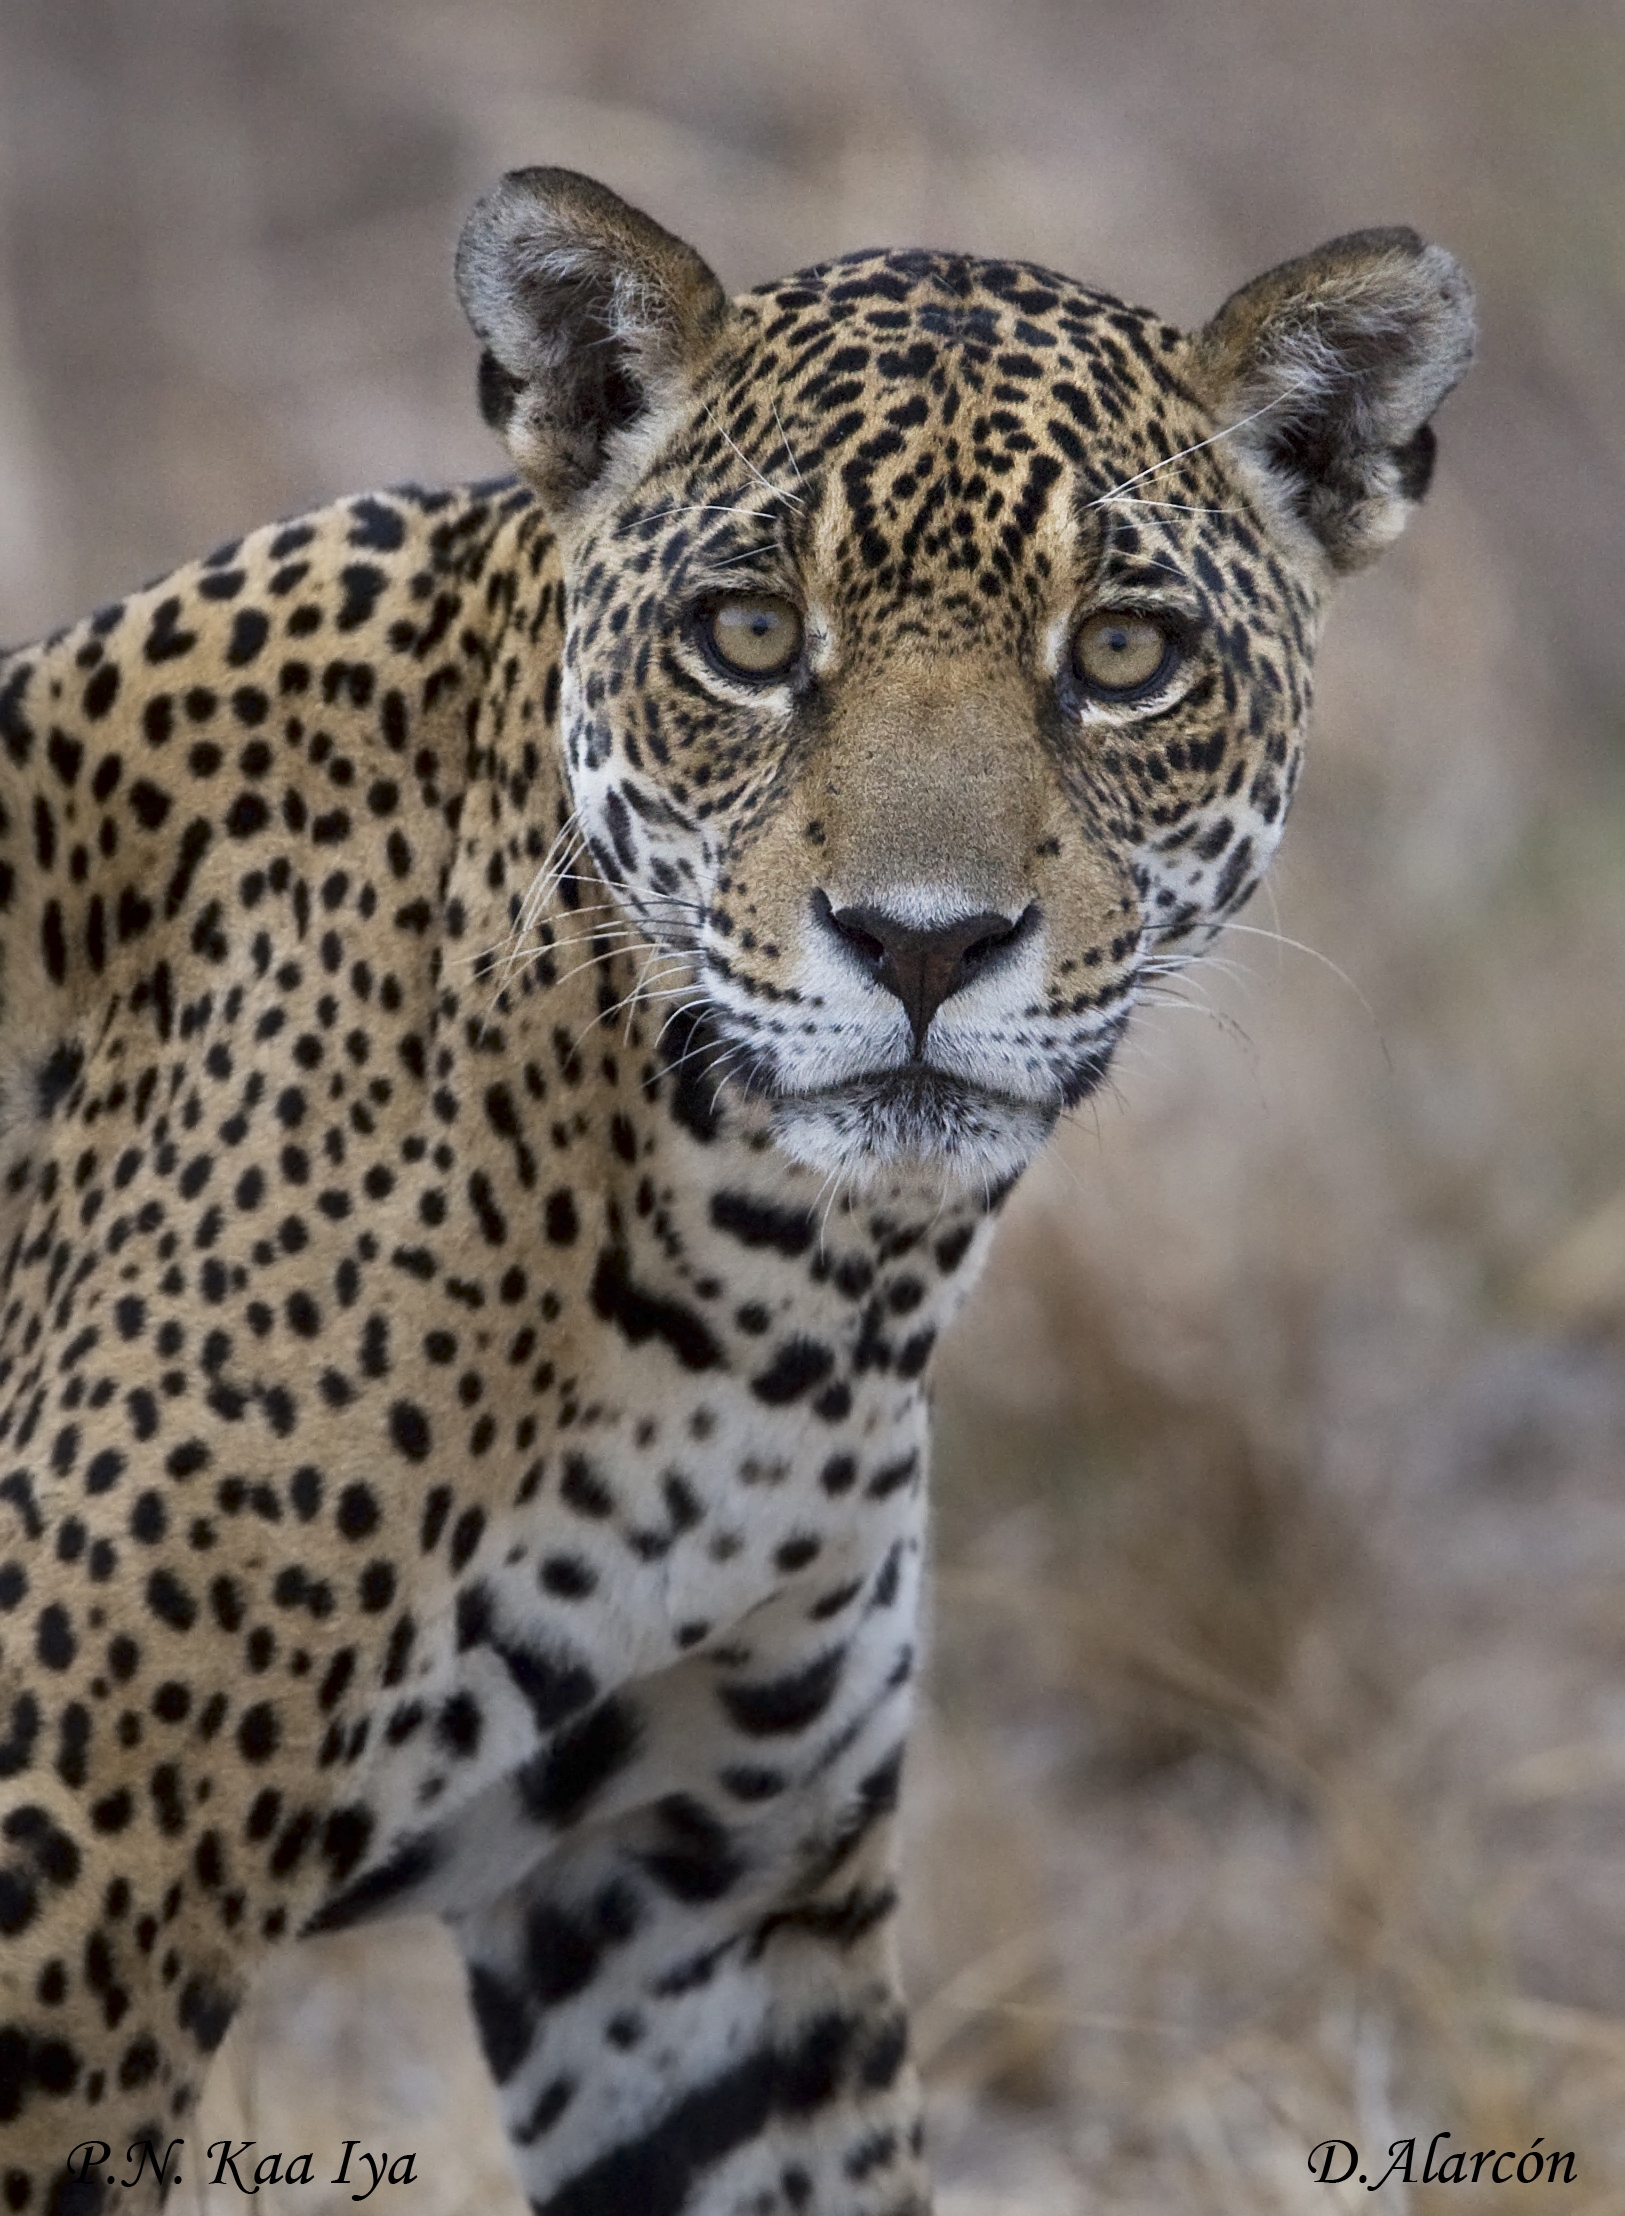 Habitat loss and overhunting synergistically drive the extirpation of jaguars from the Gran Chaco